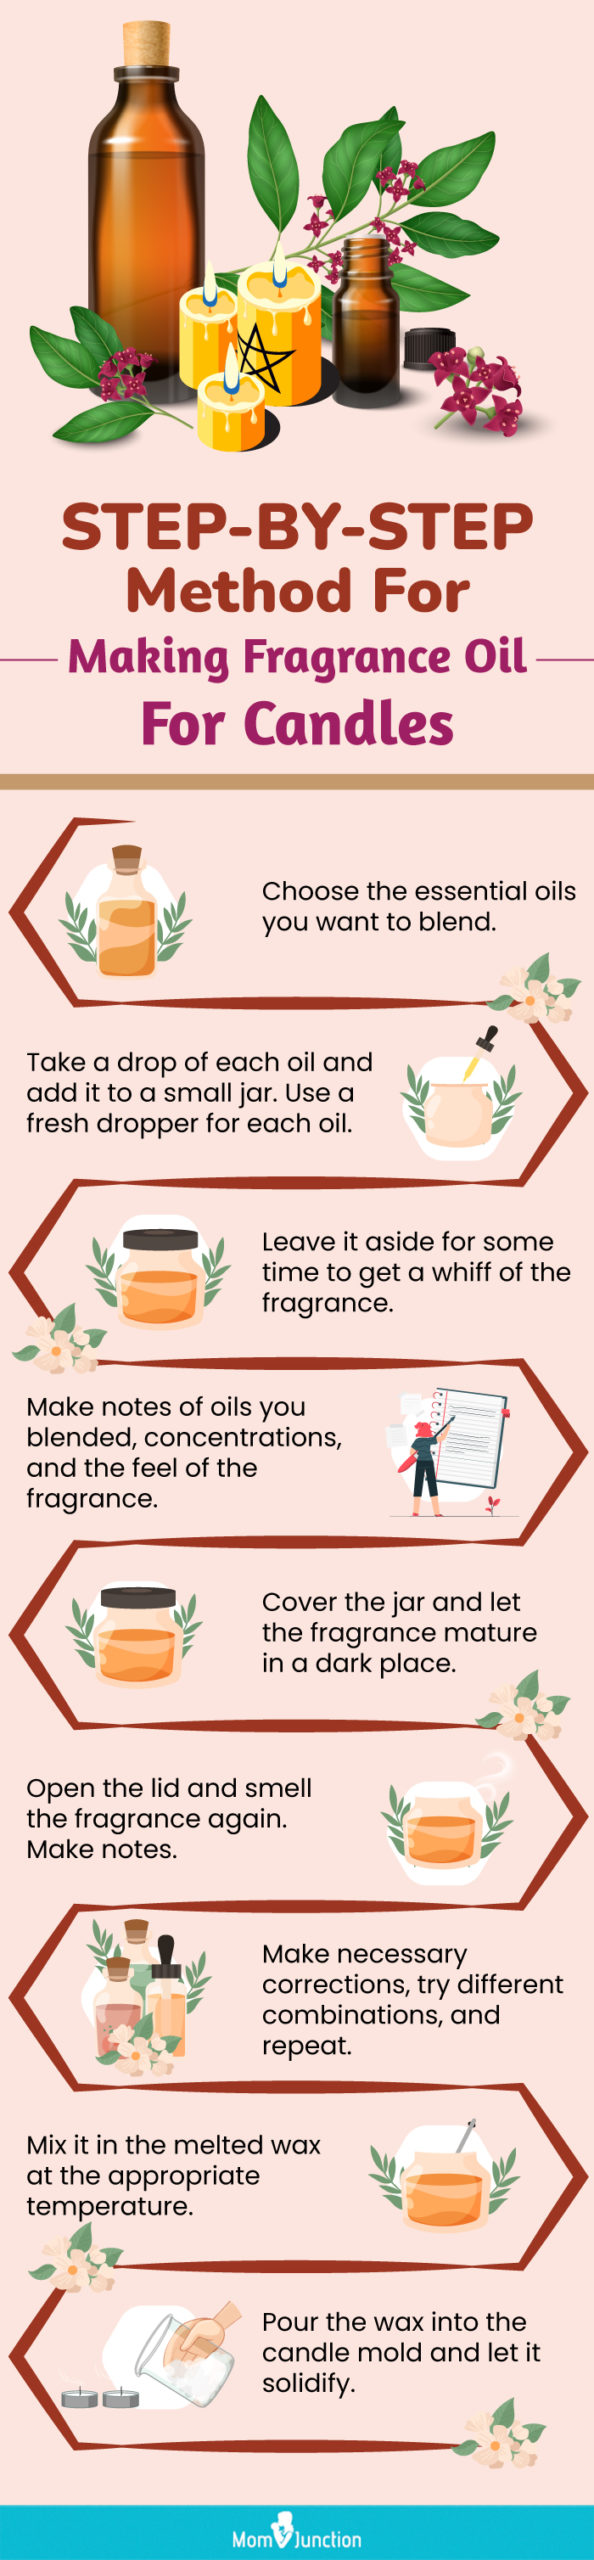 Why Should You Weigh Fragrance Oils for Candle Making?